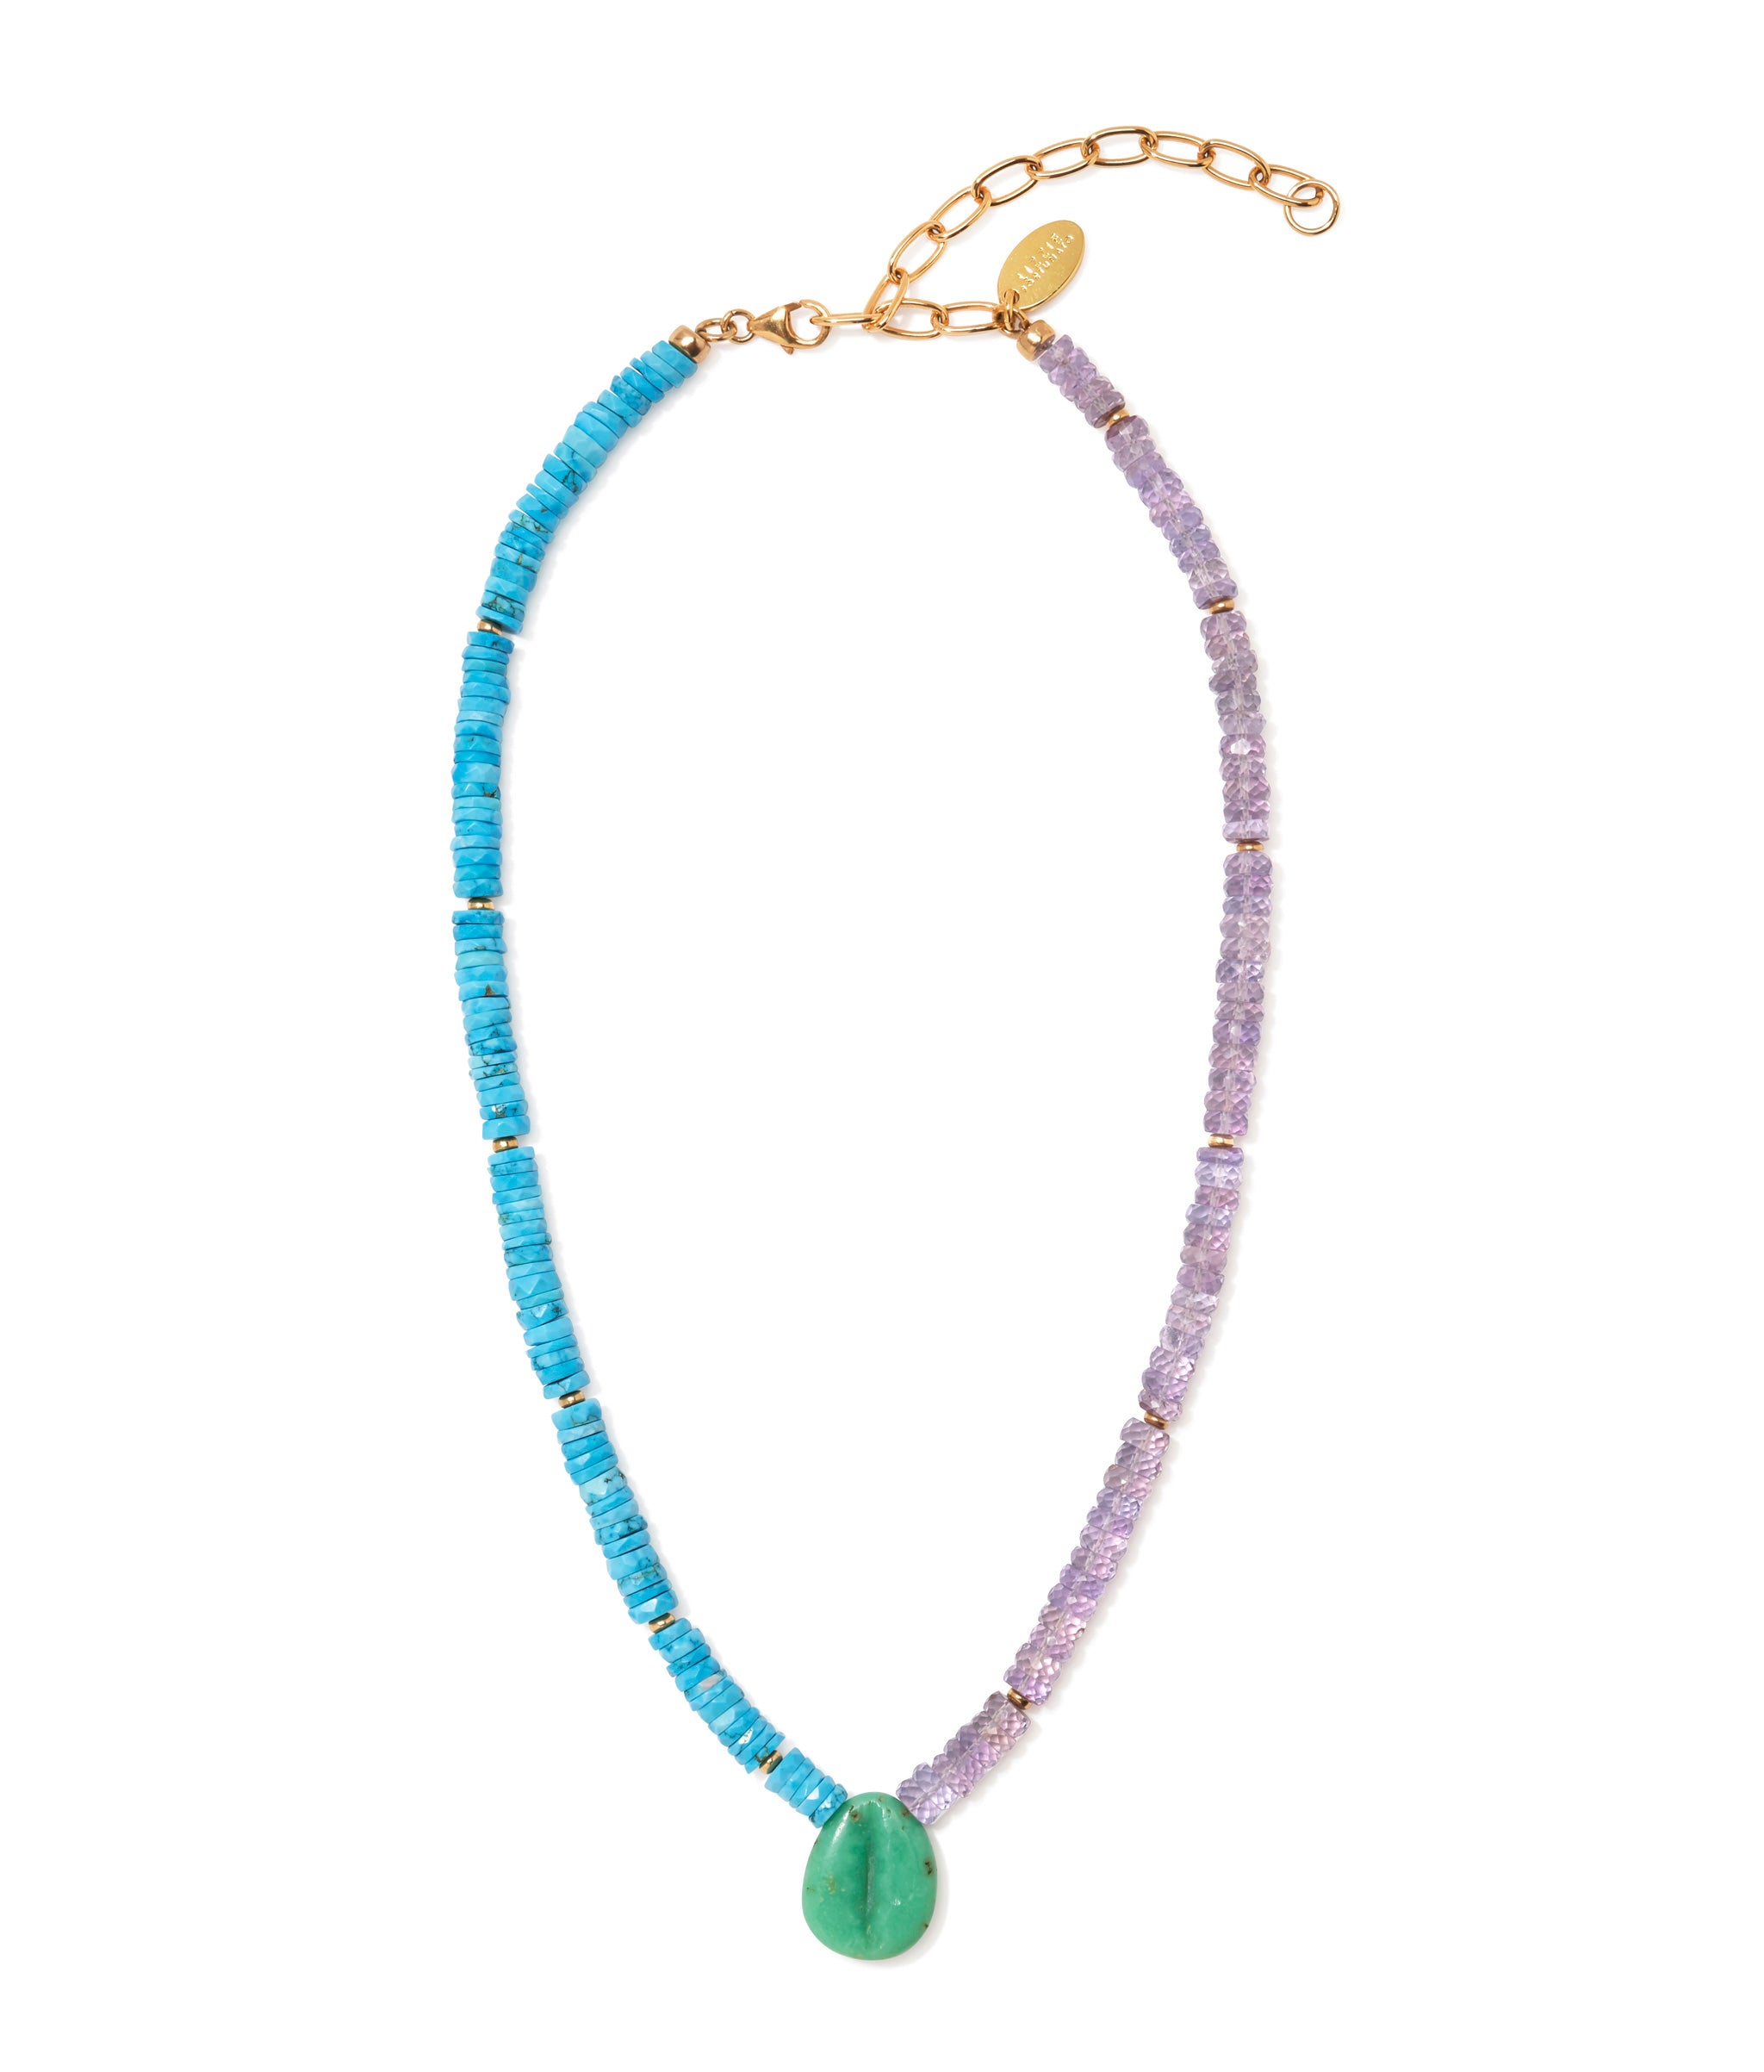 Cowrie Bead Necklace in Electric Violet. Blue howlite and amethyst beaded necklace with chrysoprase cowrie shell focal.